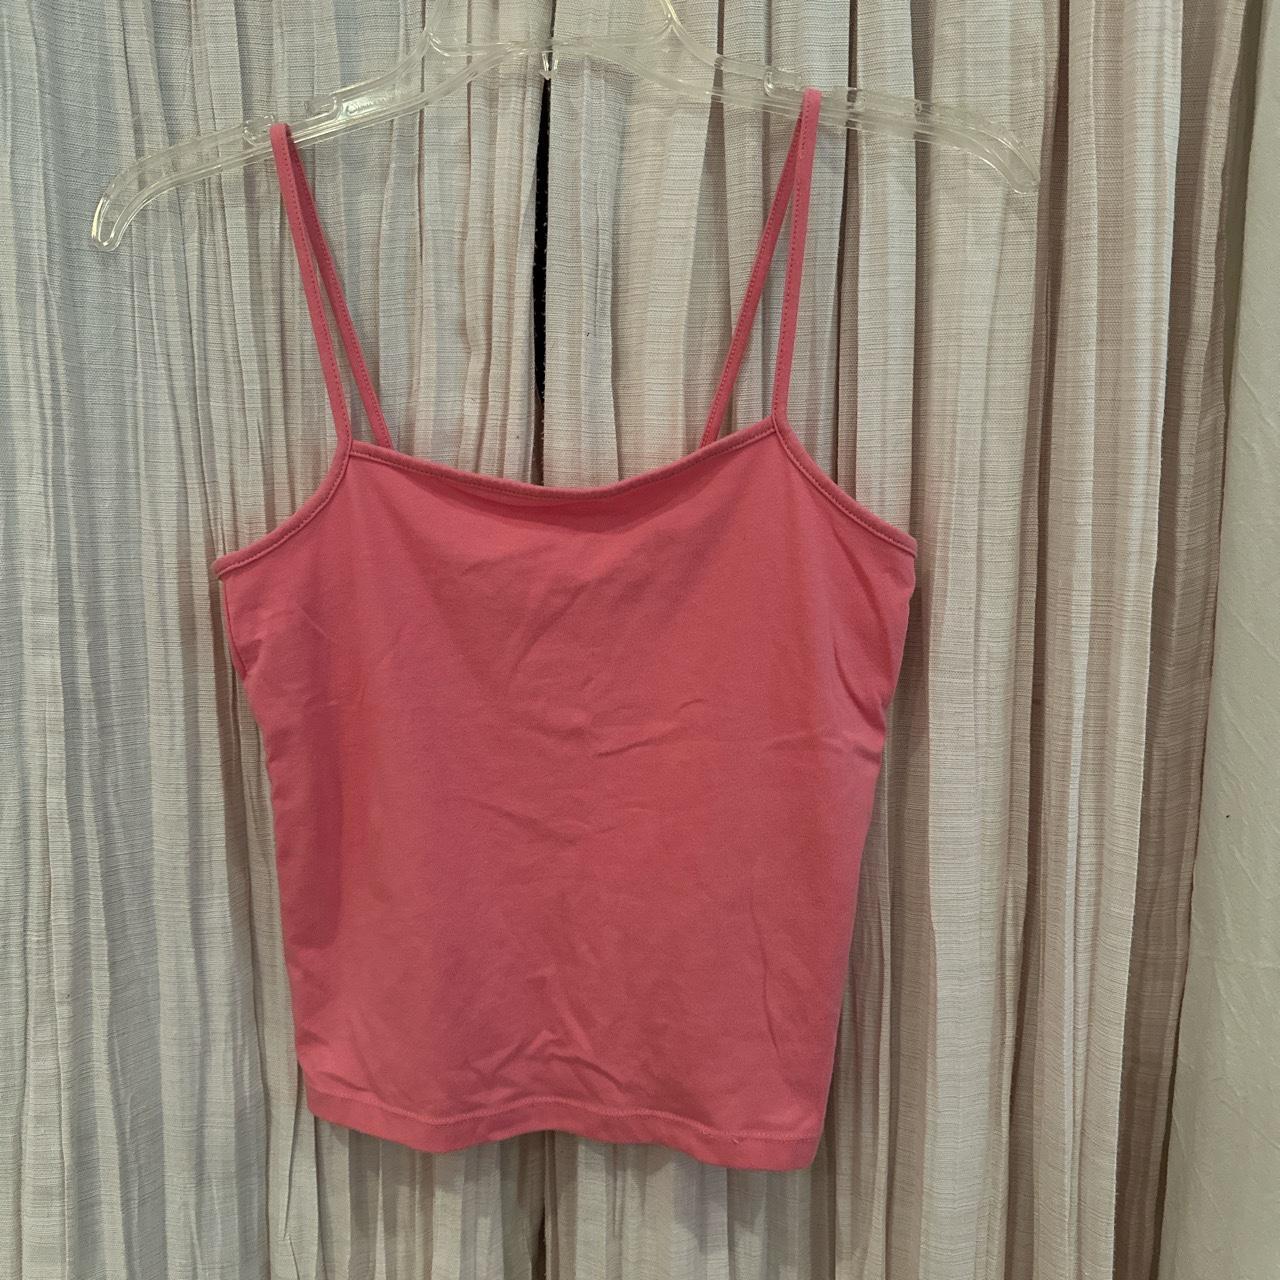 Wild fable cami perfect basic to build your outfit 👛🎀🌷 - Depop